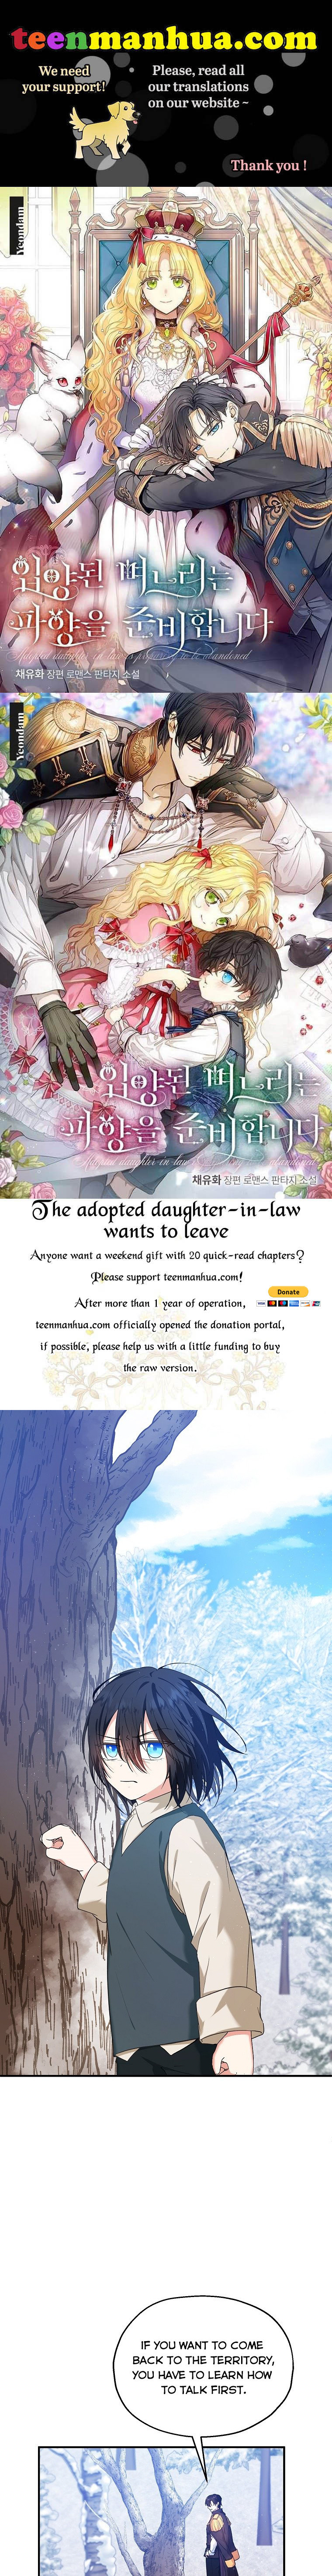 The adopted daughter-in-law wants to leave Chapter 16